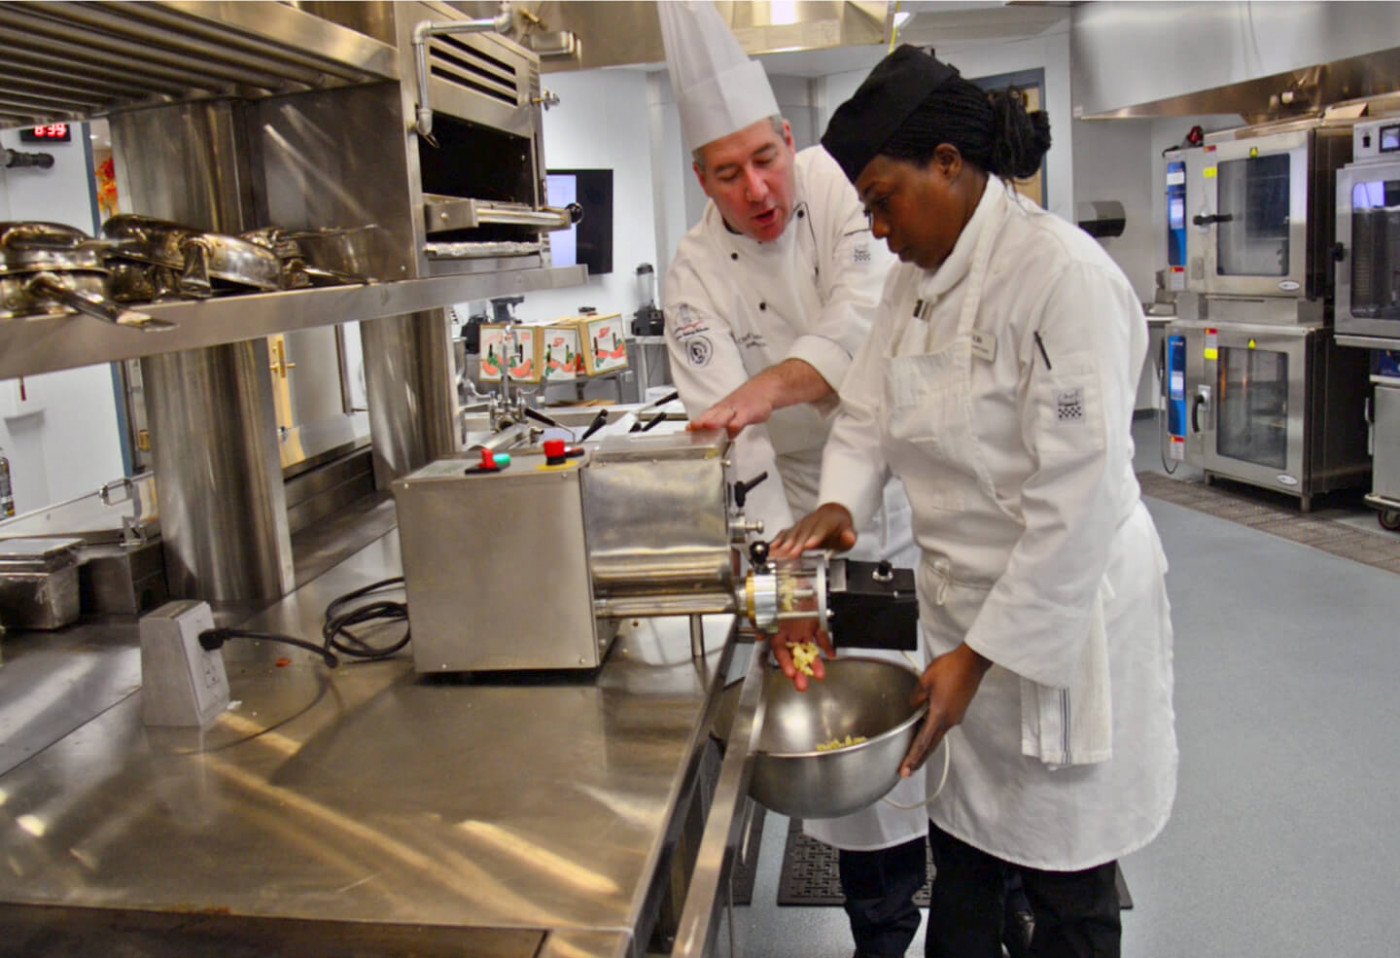 Culinary arts instruction and practice